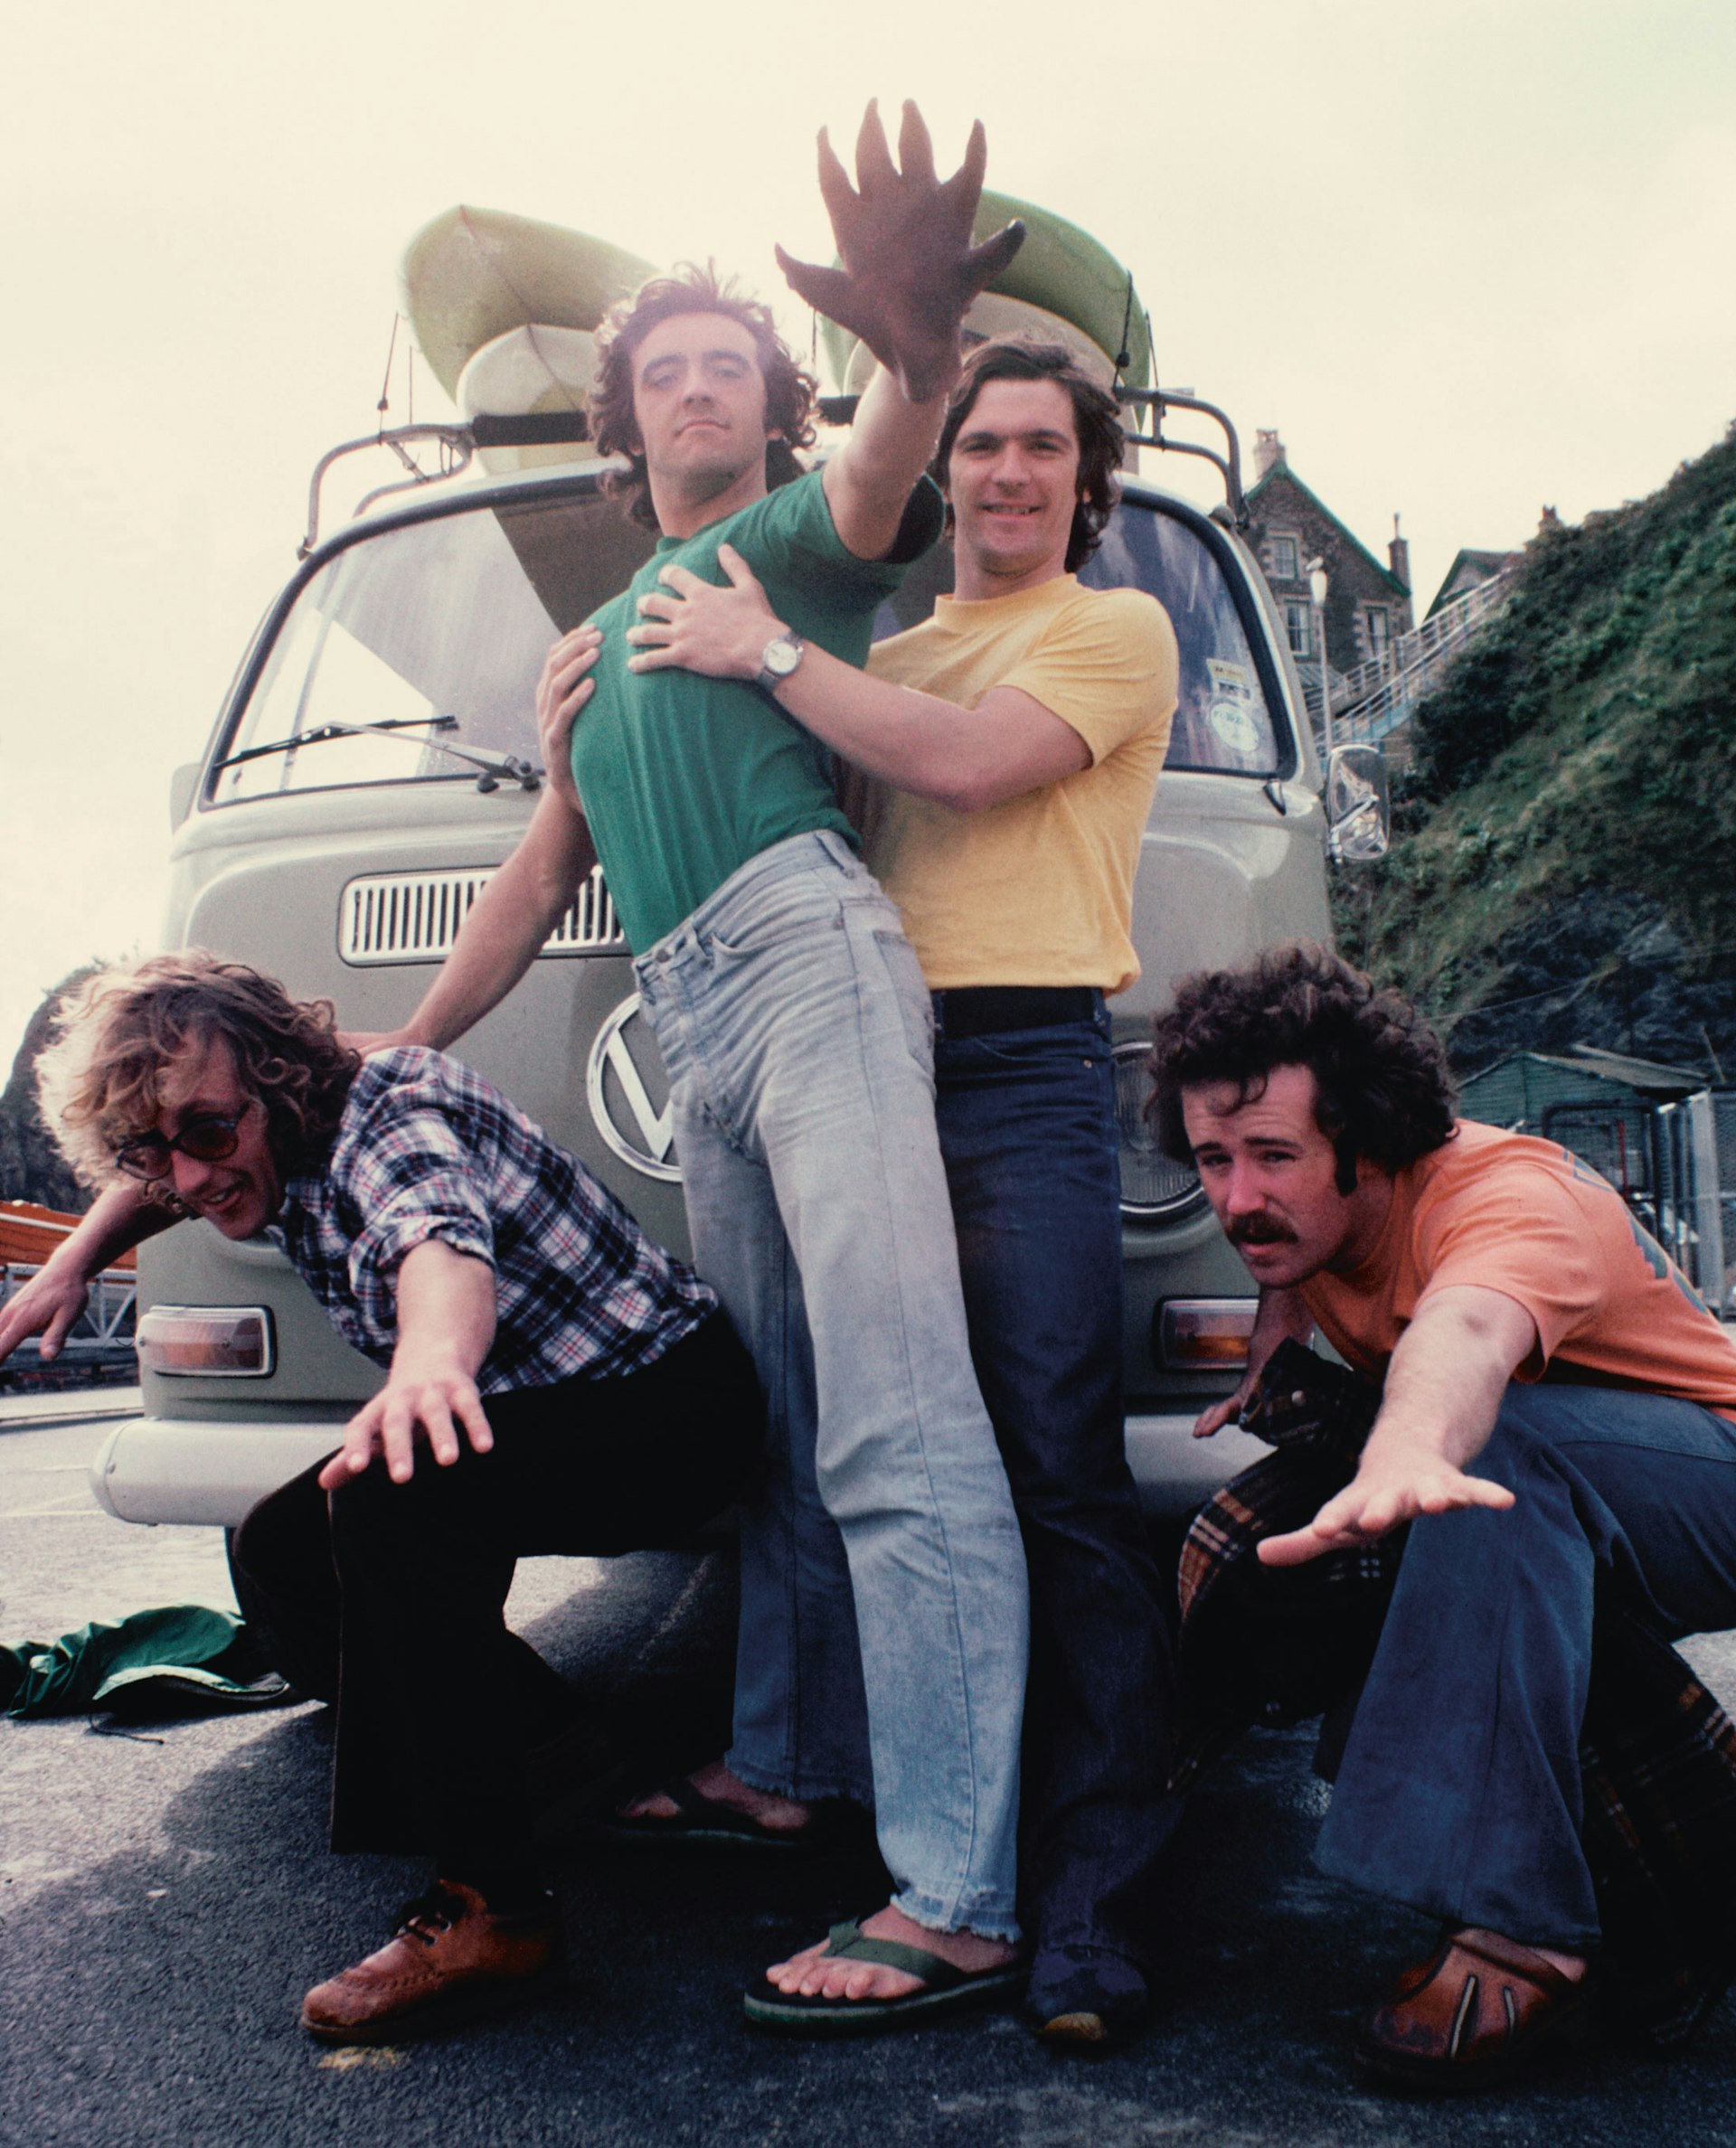 Left to right: Frank Paul, Kevin Rankin, Sandy Lamont and Pat Kieran. "'Deef Hon' was a rubber glove who lived in the van. Whoever drove the van had to wear him and give hand signals instead of indicating! Deef Hon [Deaf Hand] was so named because he had no ears!" – Kevin Rankin. Photo by Andy Bennetts